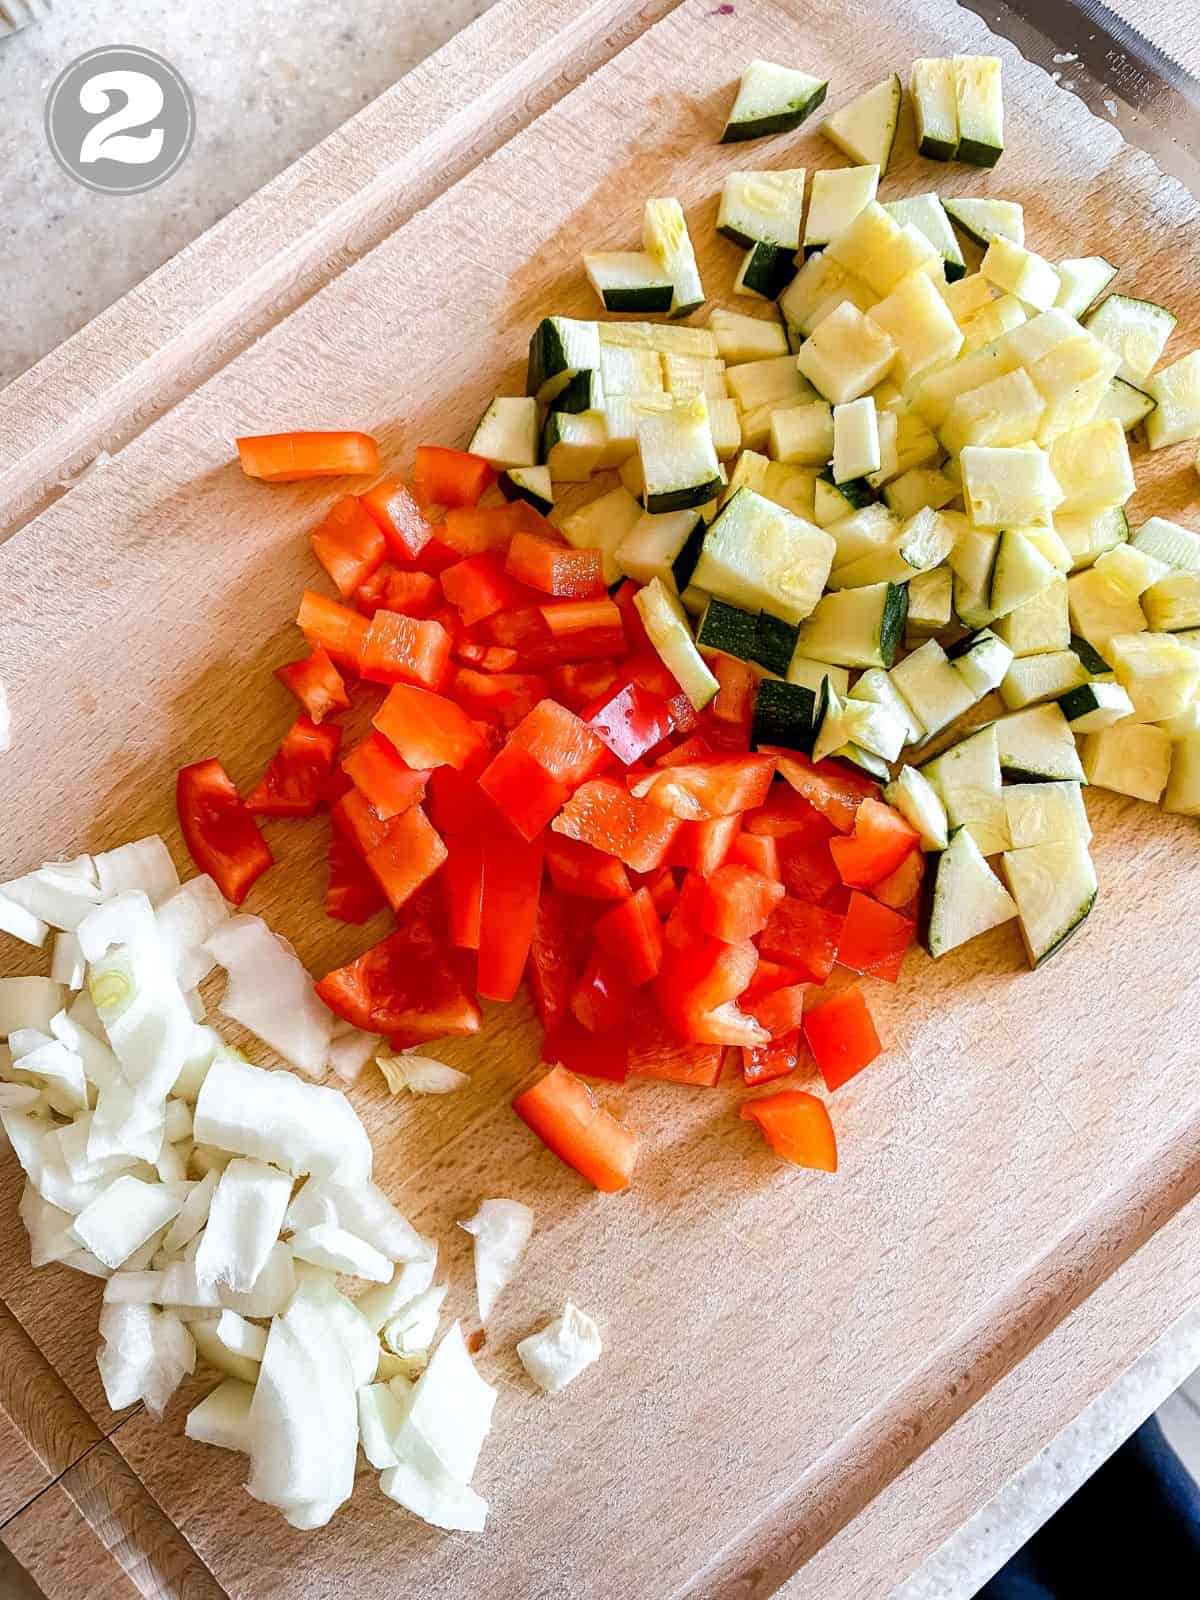 diced bell pepper, onion and zucchini on a wooden board.